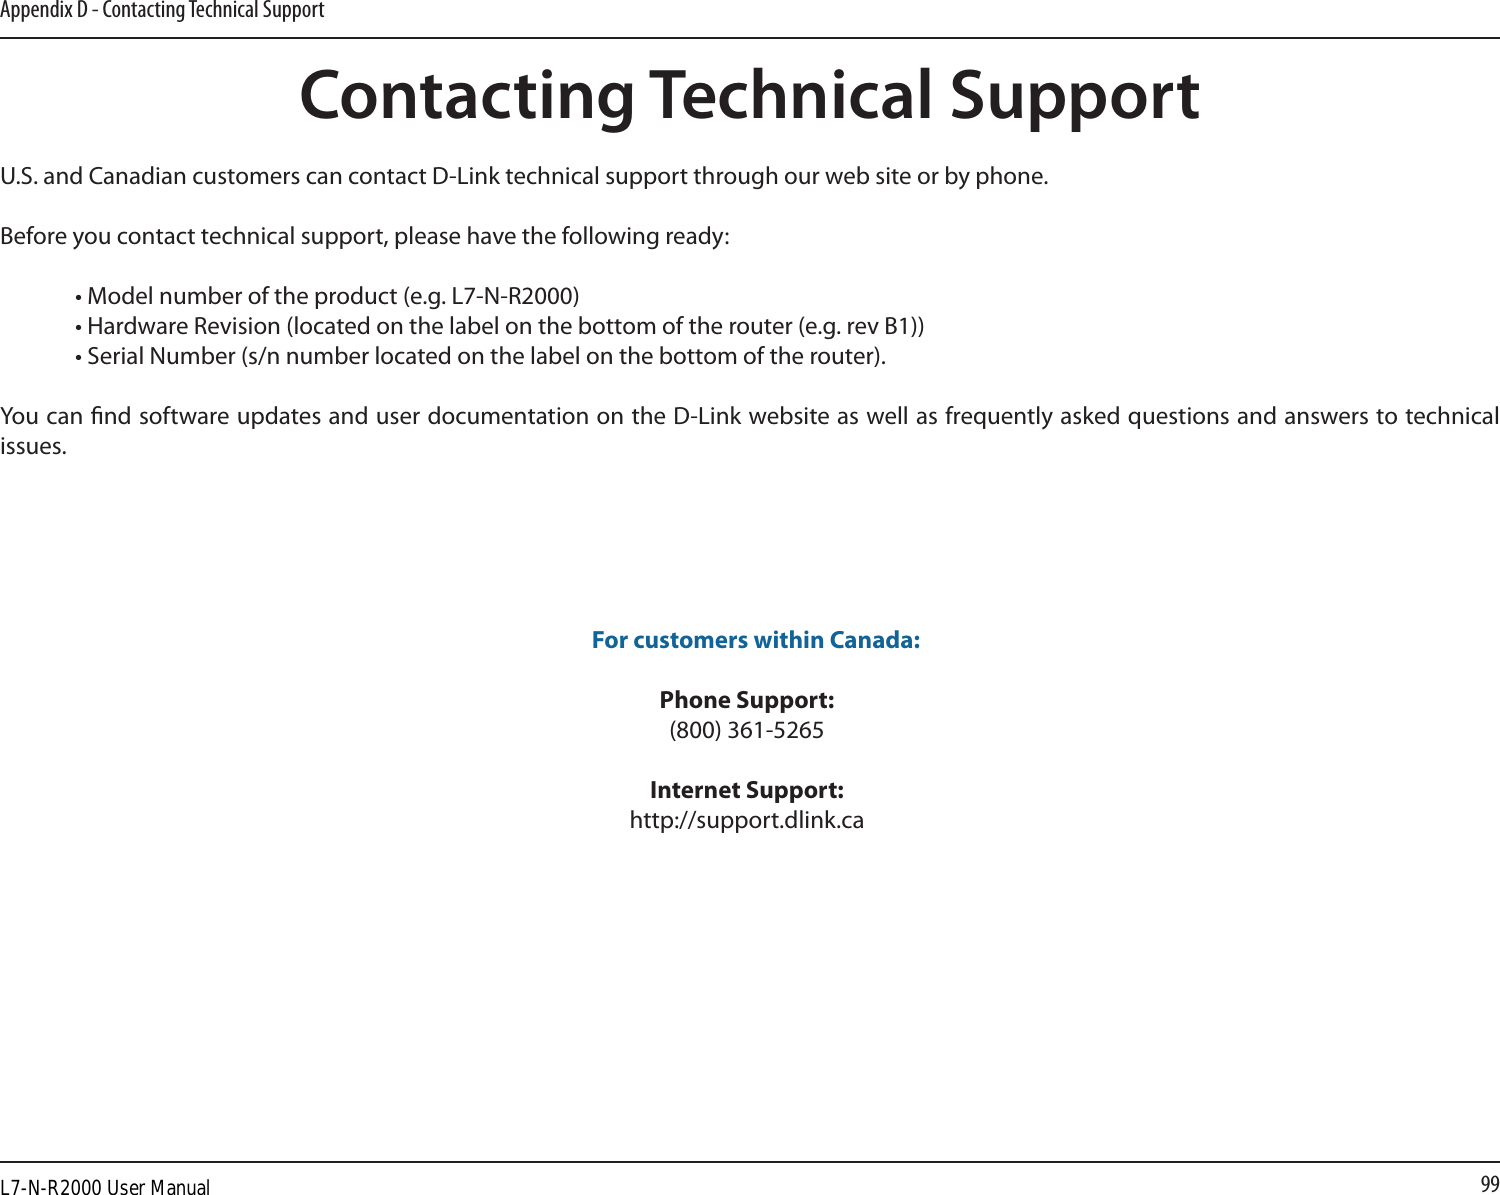 99Appendix D - Contacting Technical SupportContacting Technical SupportU.S. and Canadian customers can contact D-Link technical support through our web site or by phone.Before you contact technical support, please have the following ready:  • Model number of the product (e.g. L7-N-R2000)  • Hardware Revision (located on the label on the bottom of the router (e.g. rev B1))  • Serial Number (s/n number located on the label on the bottom of the router). You can nd software updates and user documentation on the D-Link website as well as frequently asked questions and answers to technical issues. For customers within Canada: Phone Support:(800) 361-5265 Internet Support:http://support.dlink.caL7-N-R2000 User Manual